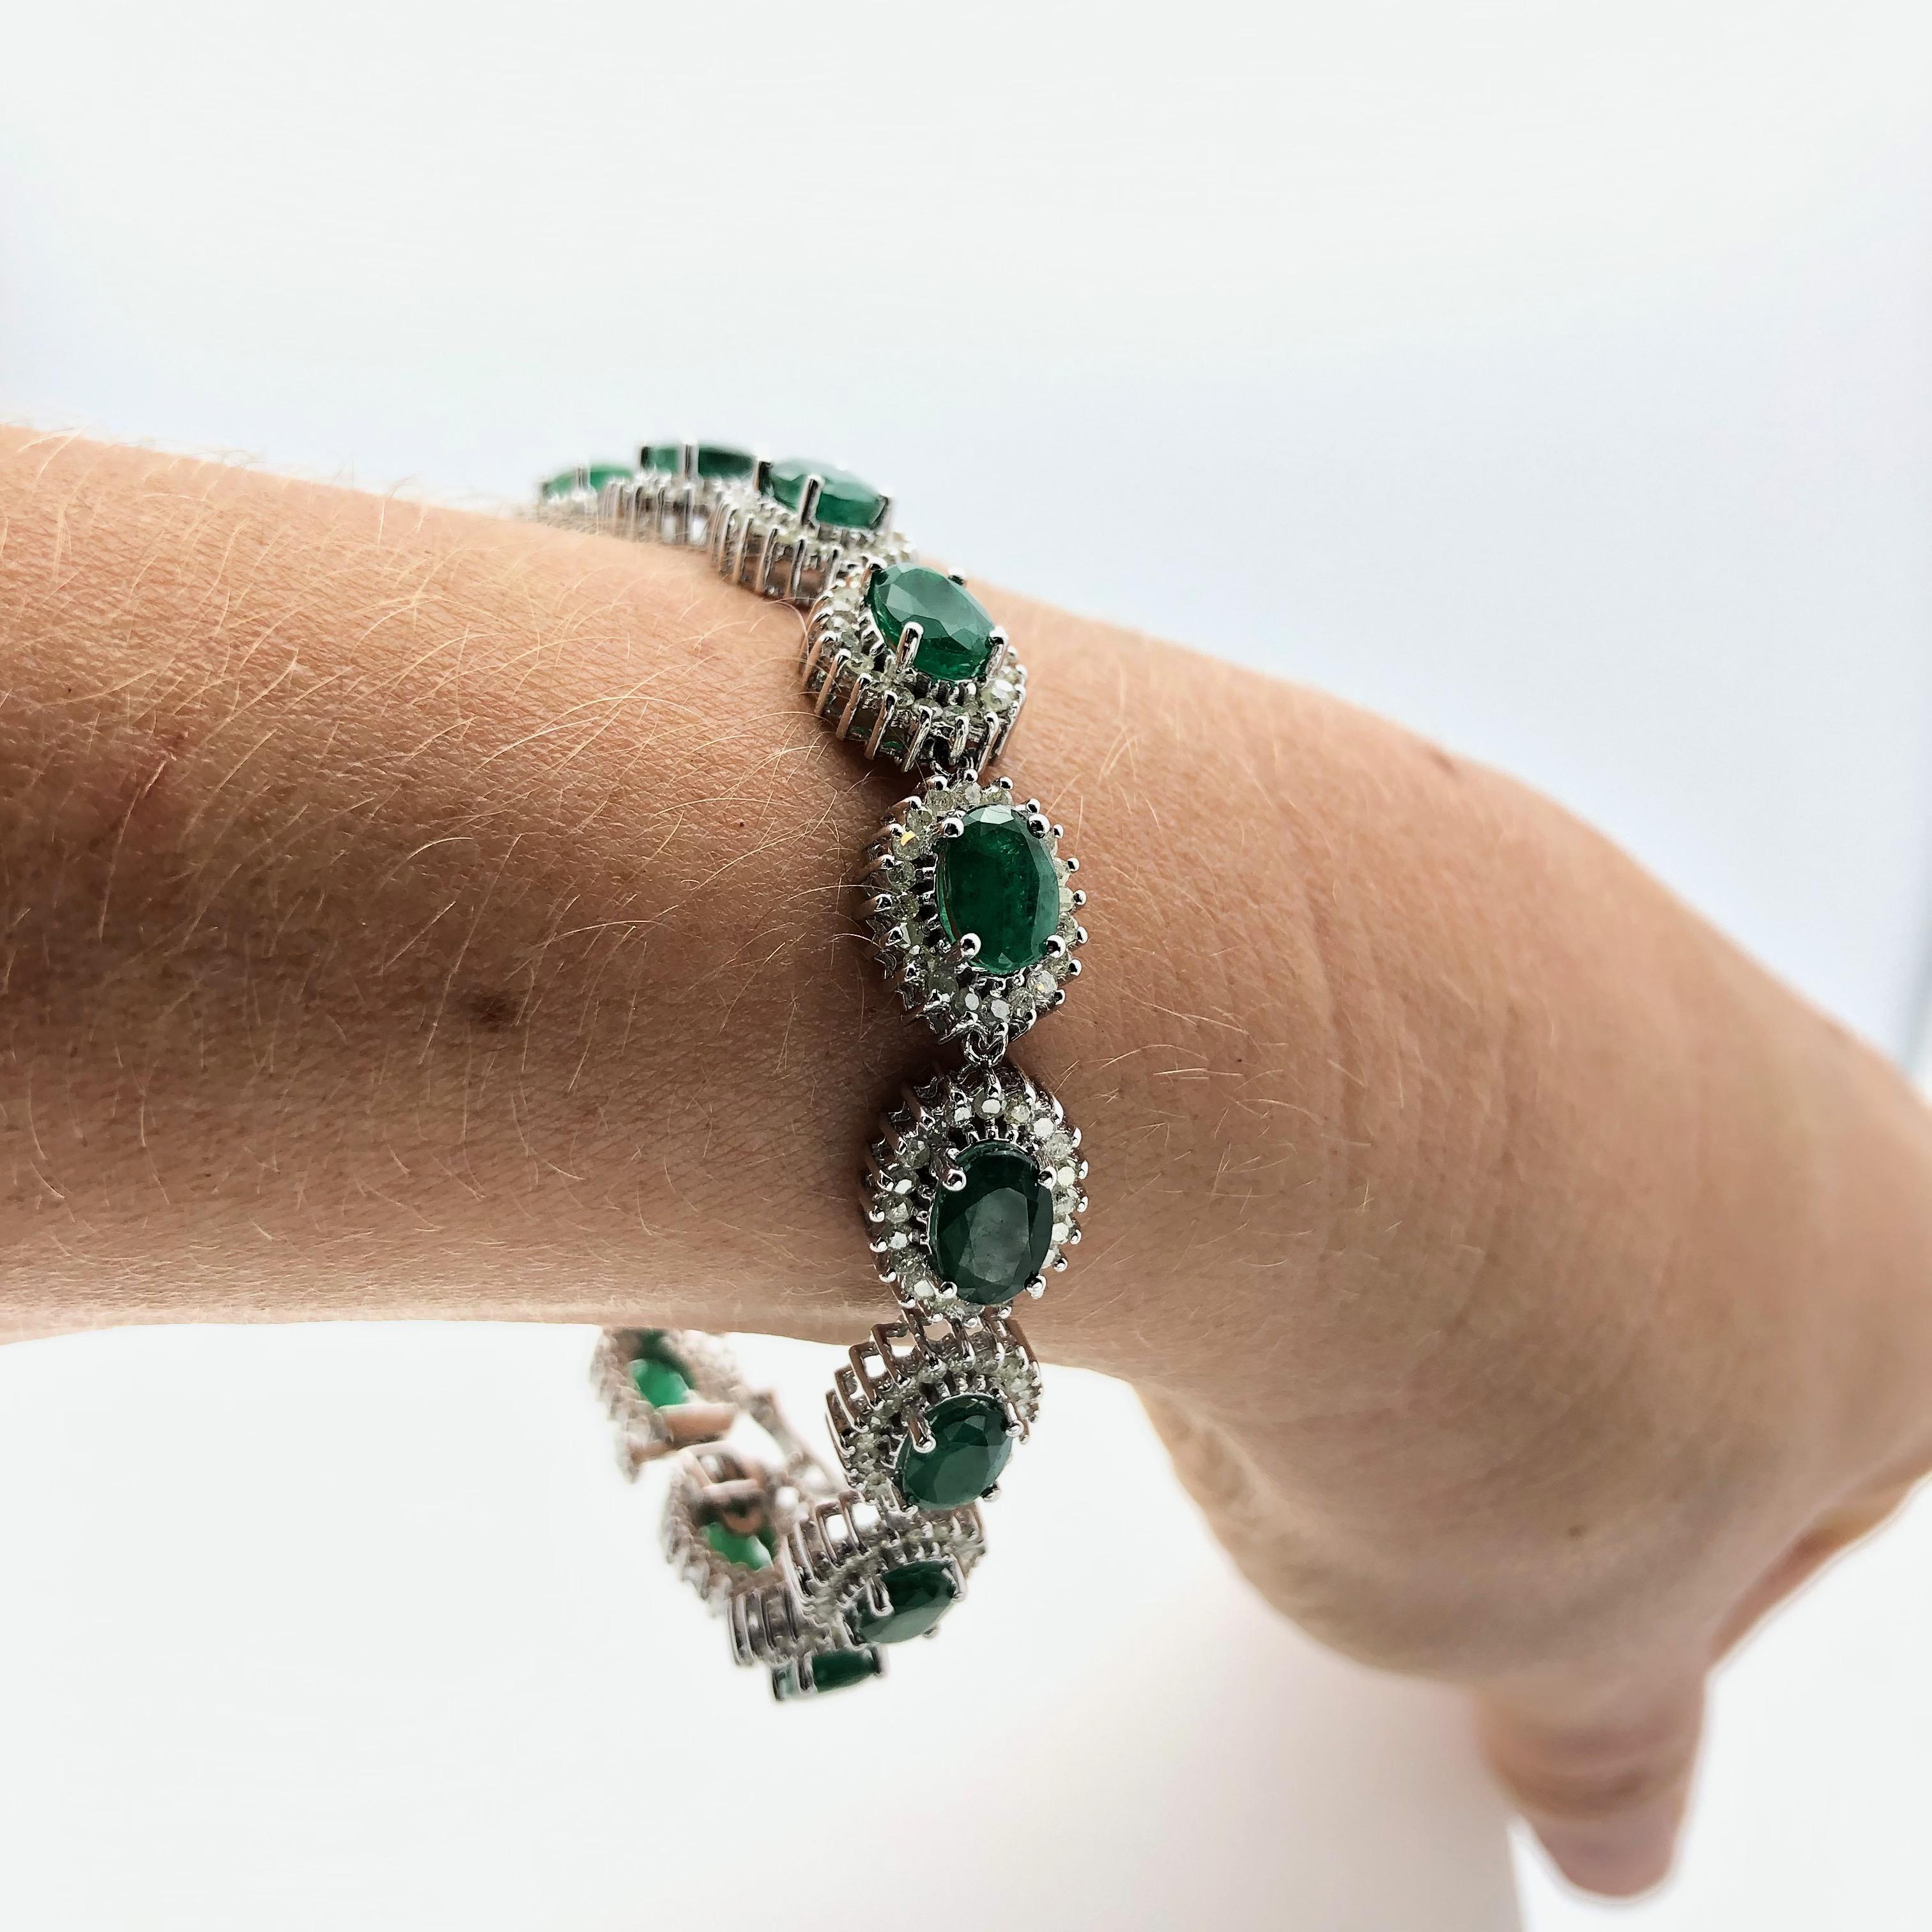 One white gold bracelet mounted with genuine emeralds hi-lighted with genuine diamonds. this entire item weight 19.70 grams, measure 7.5 inches long and 0.4 wide. ( metric 18.5 x 0.5 mm )
-Emeralds 15 oval shape forest green medium dark total weight